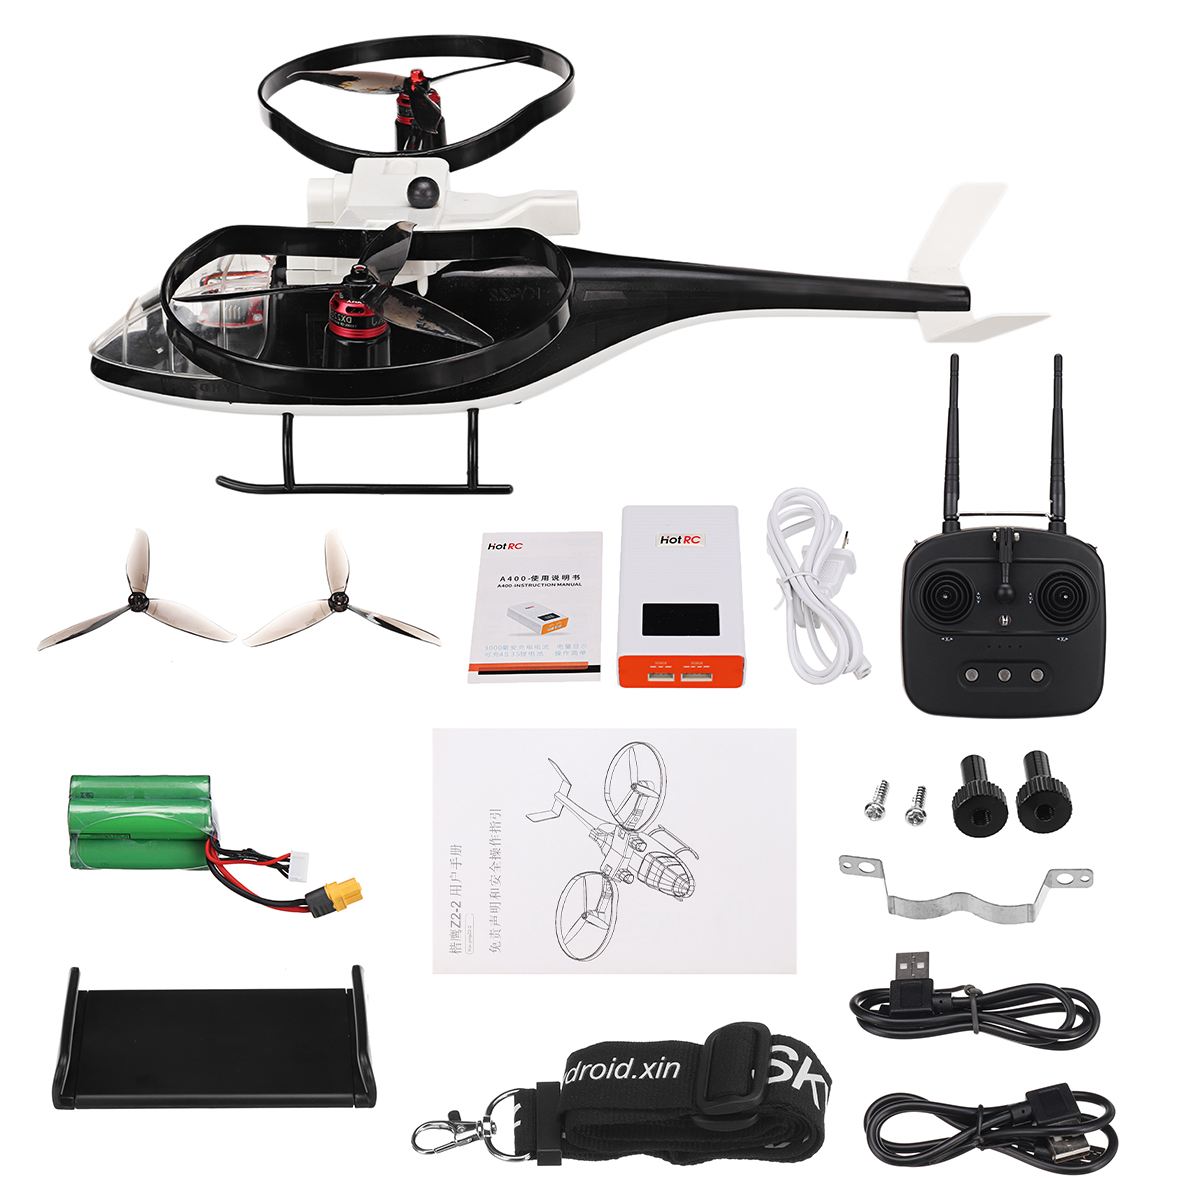 KY-Z2-6CH-Two-axis-Brushless-Helicopter-720P-FPV-RTF-Version-Support-Fixed-point-Fixed-altitude-Flig-1880504-1